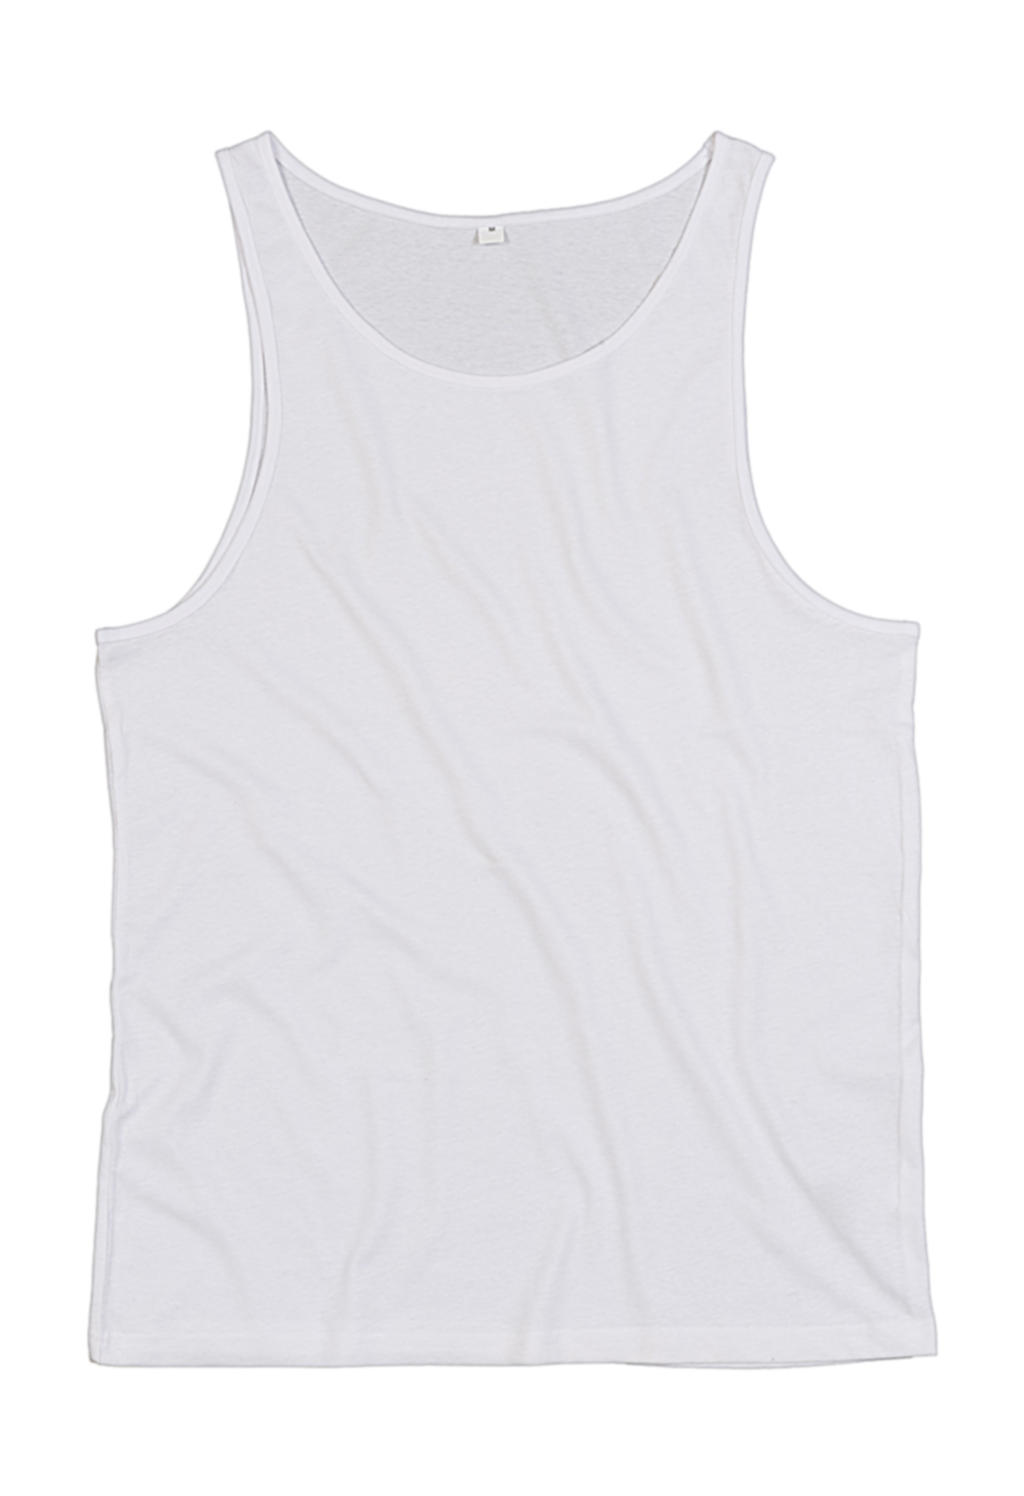  One Drop Armhole Vest in Farbe White